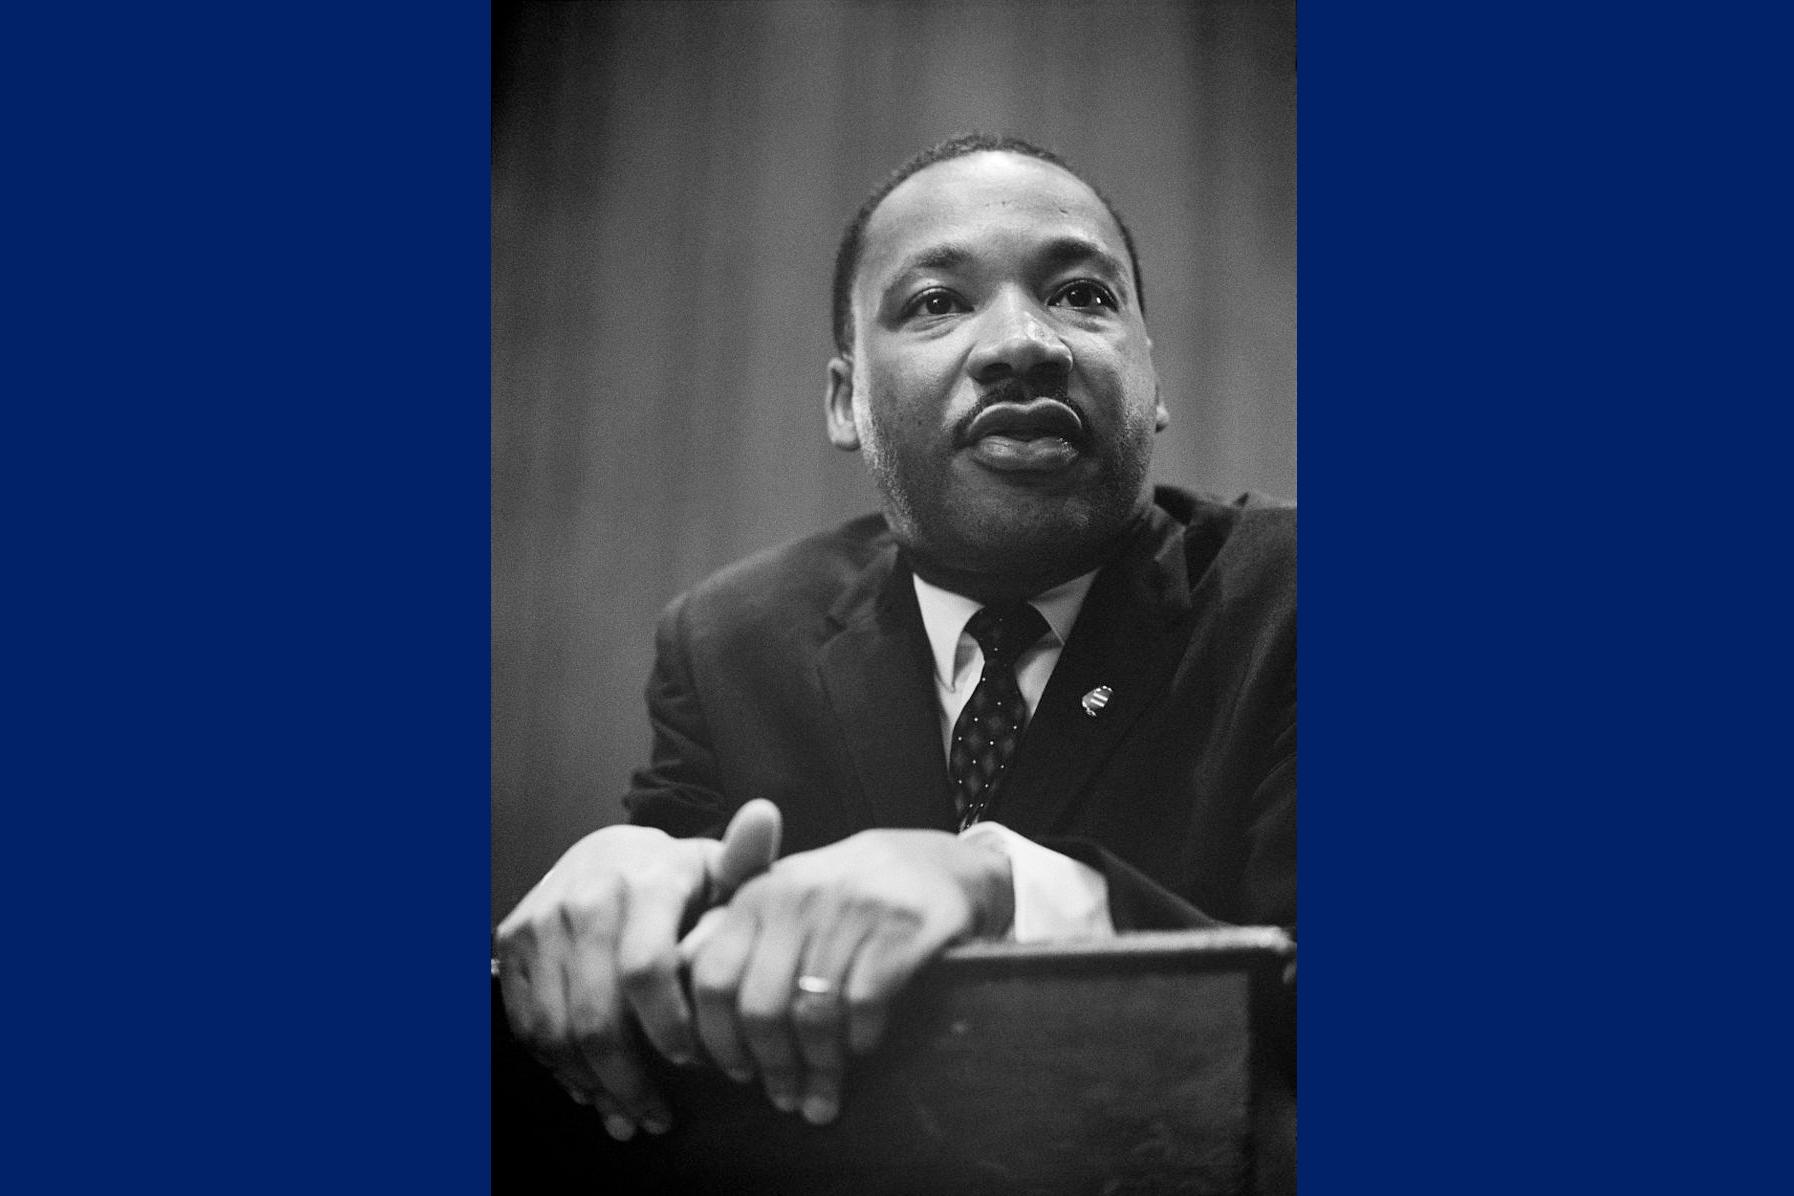 Image of Martin Luther King, Jr.